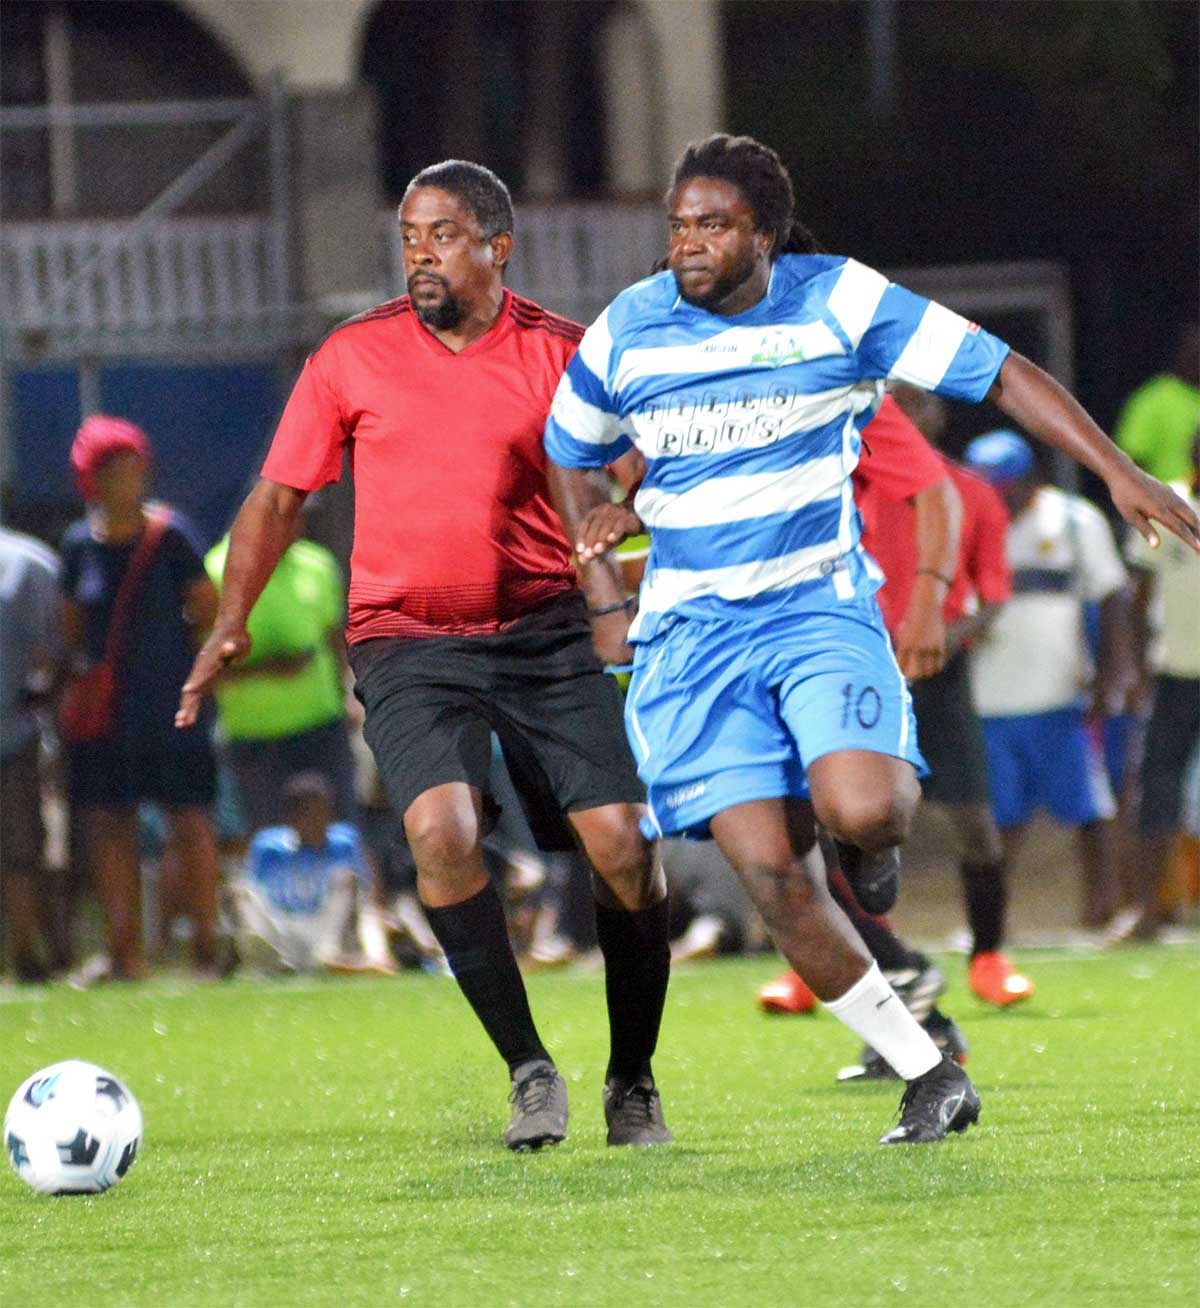 Gros Islet Veterans takes on Era Masters in the finals 